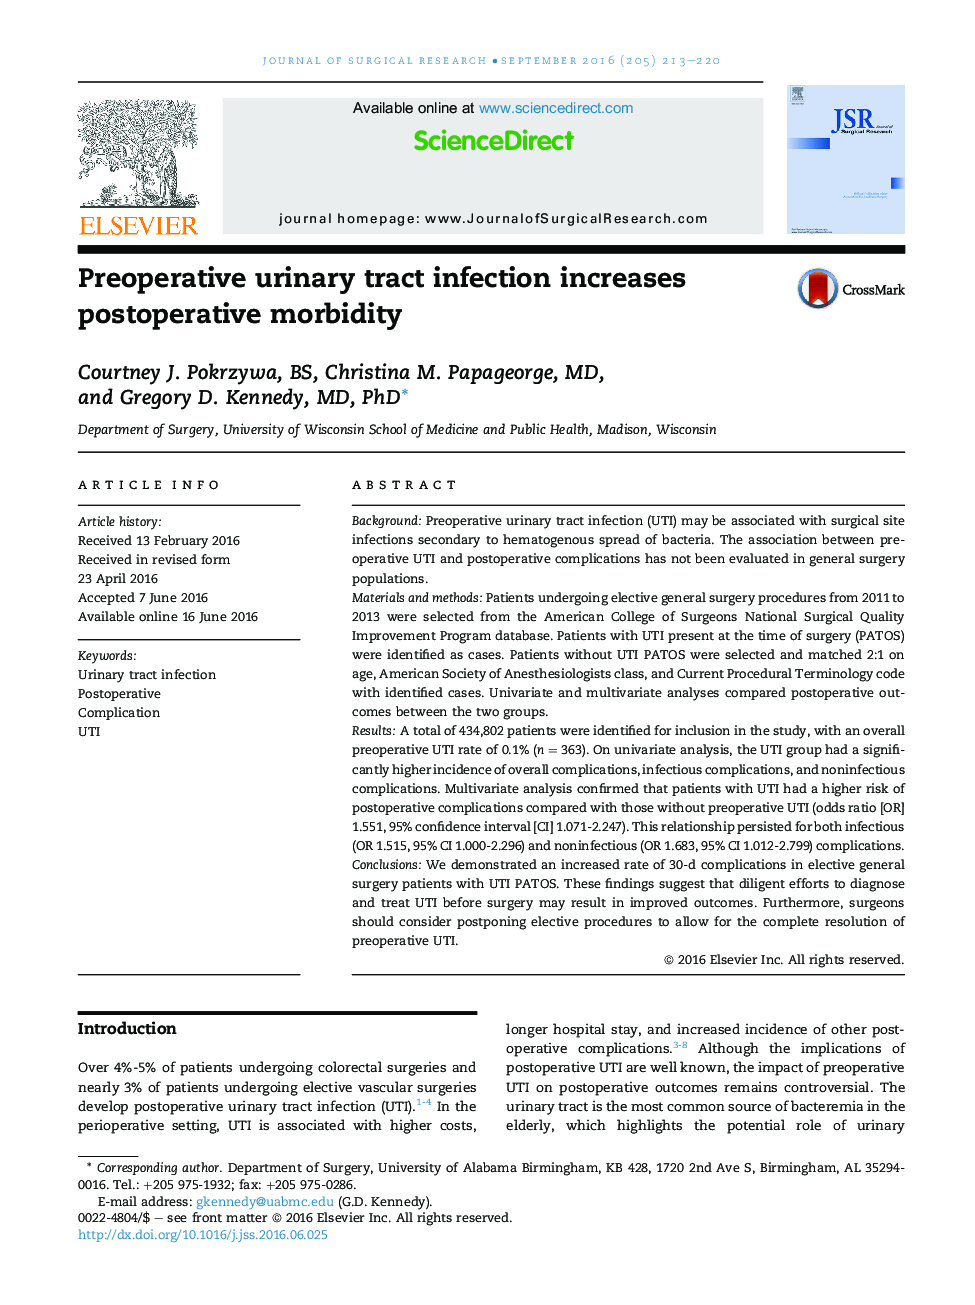 Preoperative urinary tract infection increases postoperative morbidity